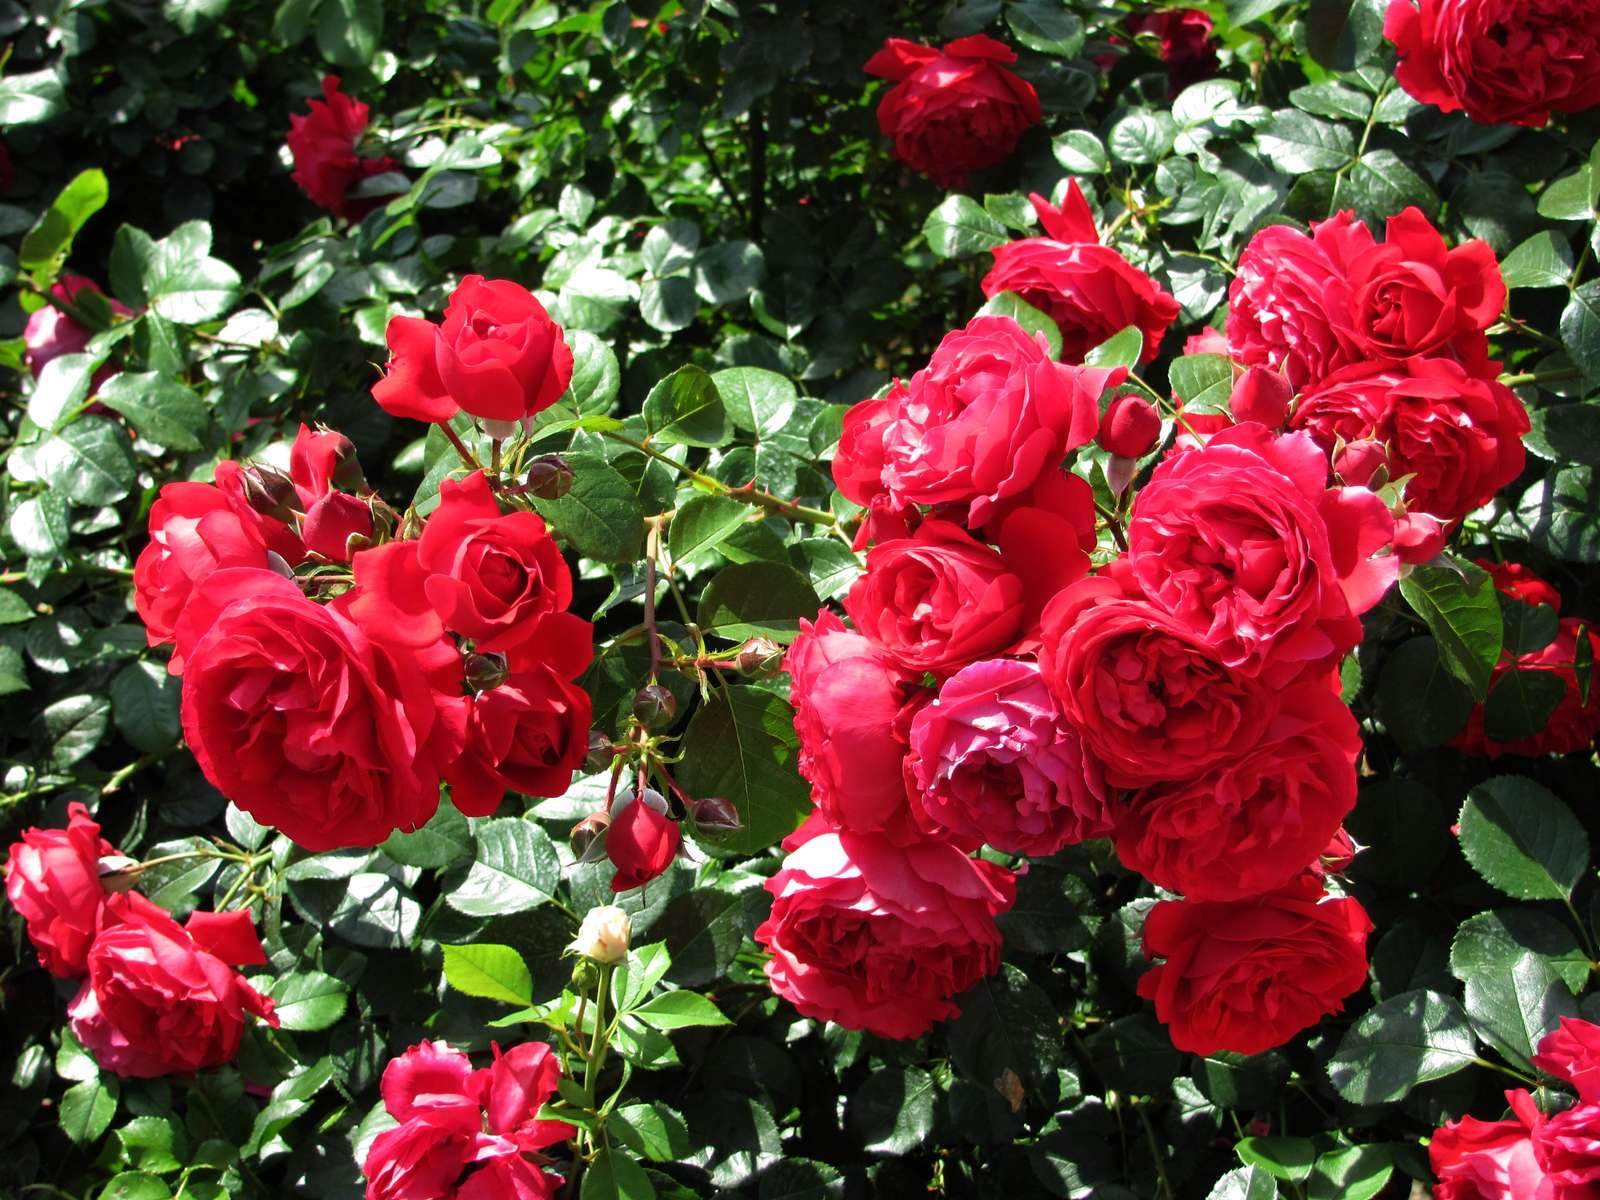 roses in the garden jigsaw puzzle online